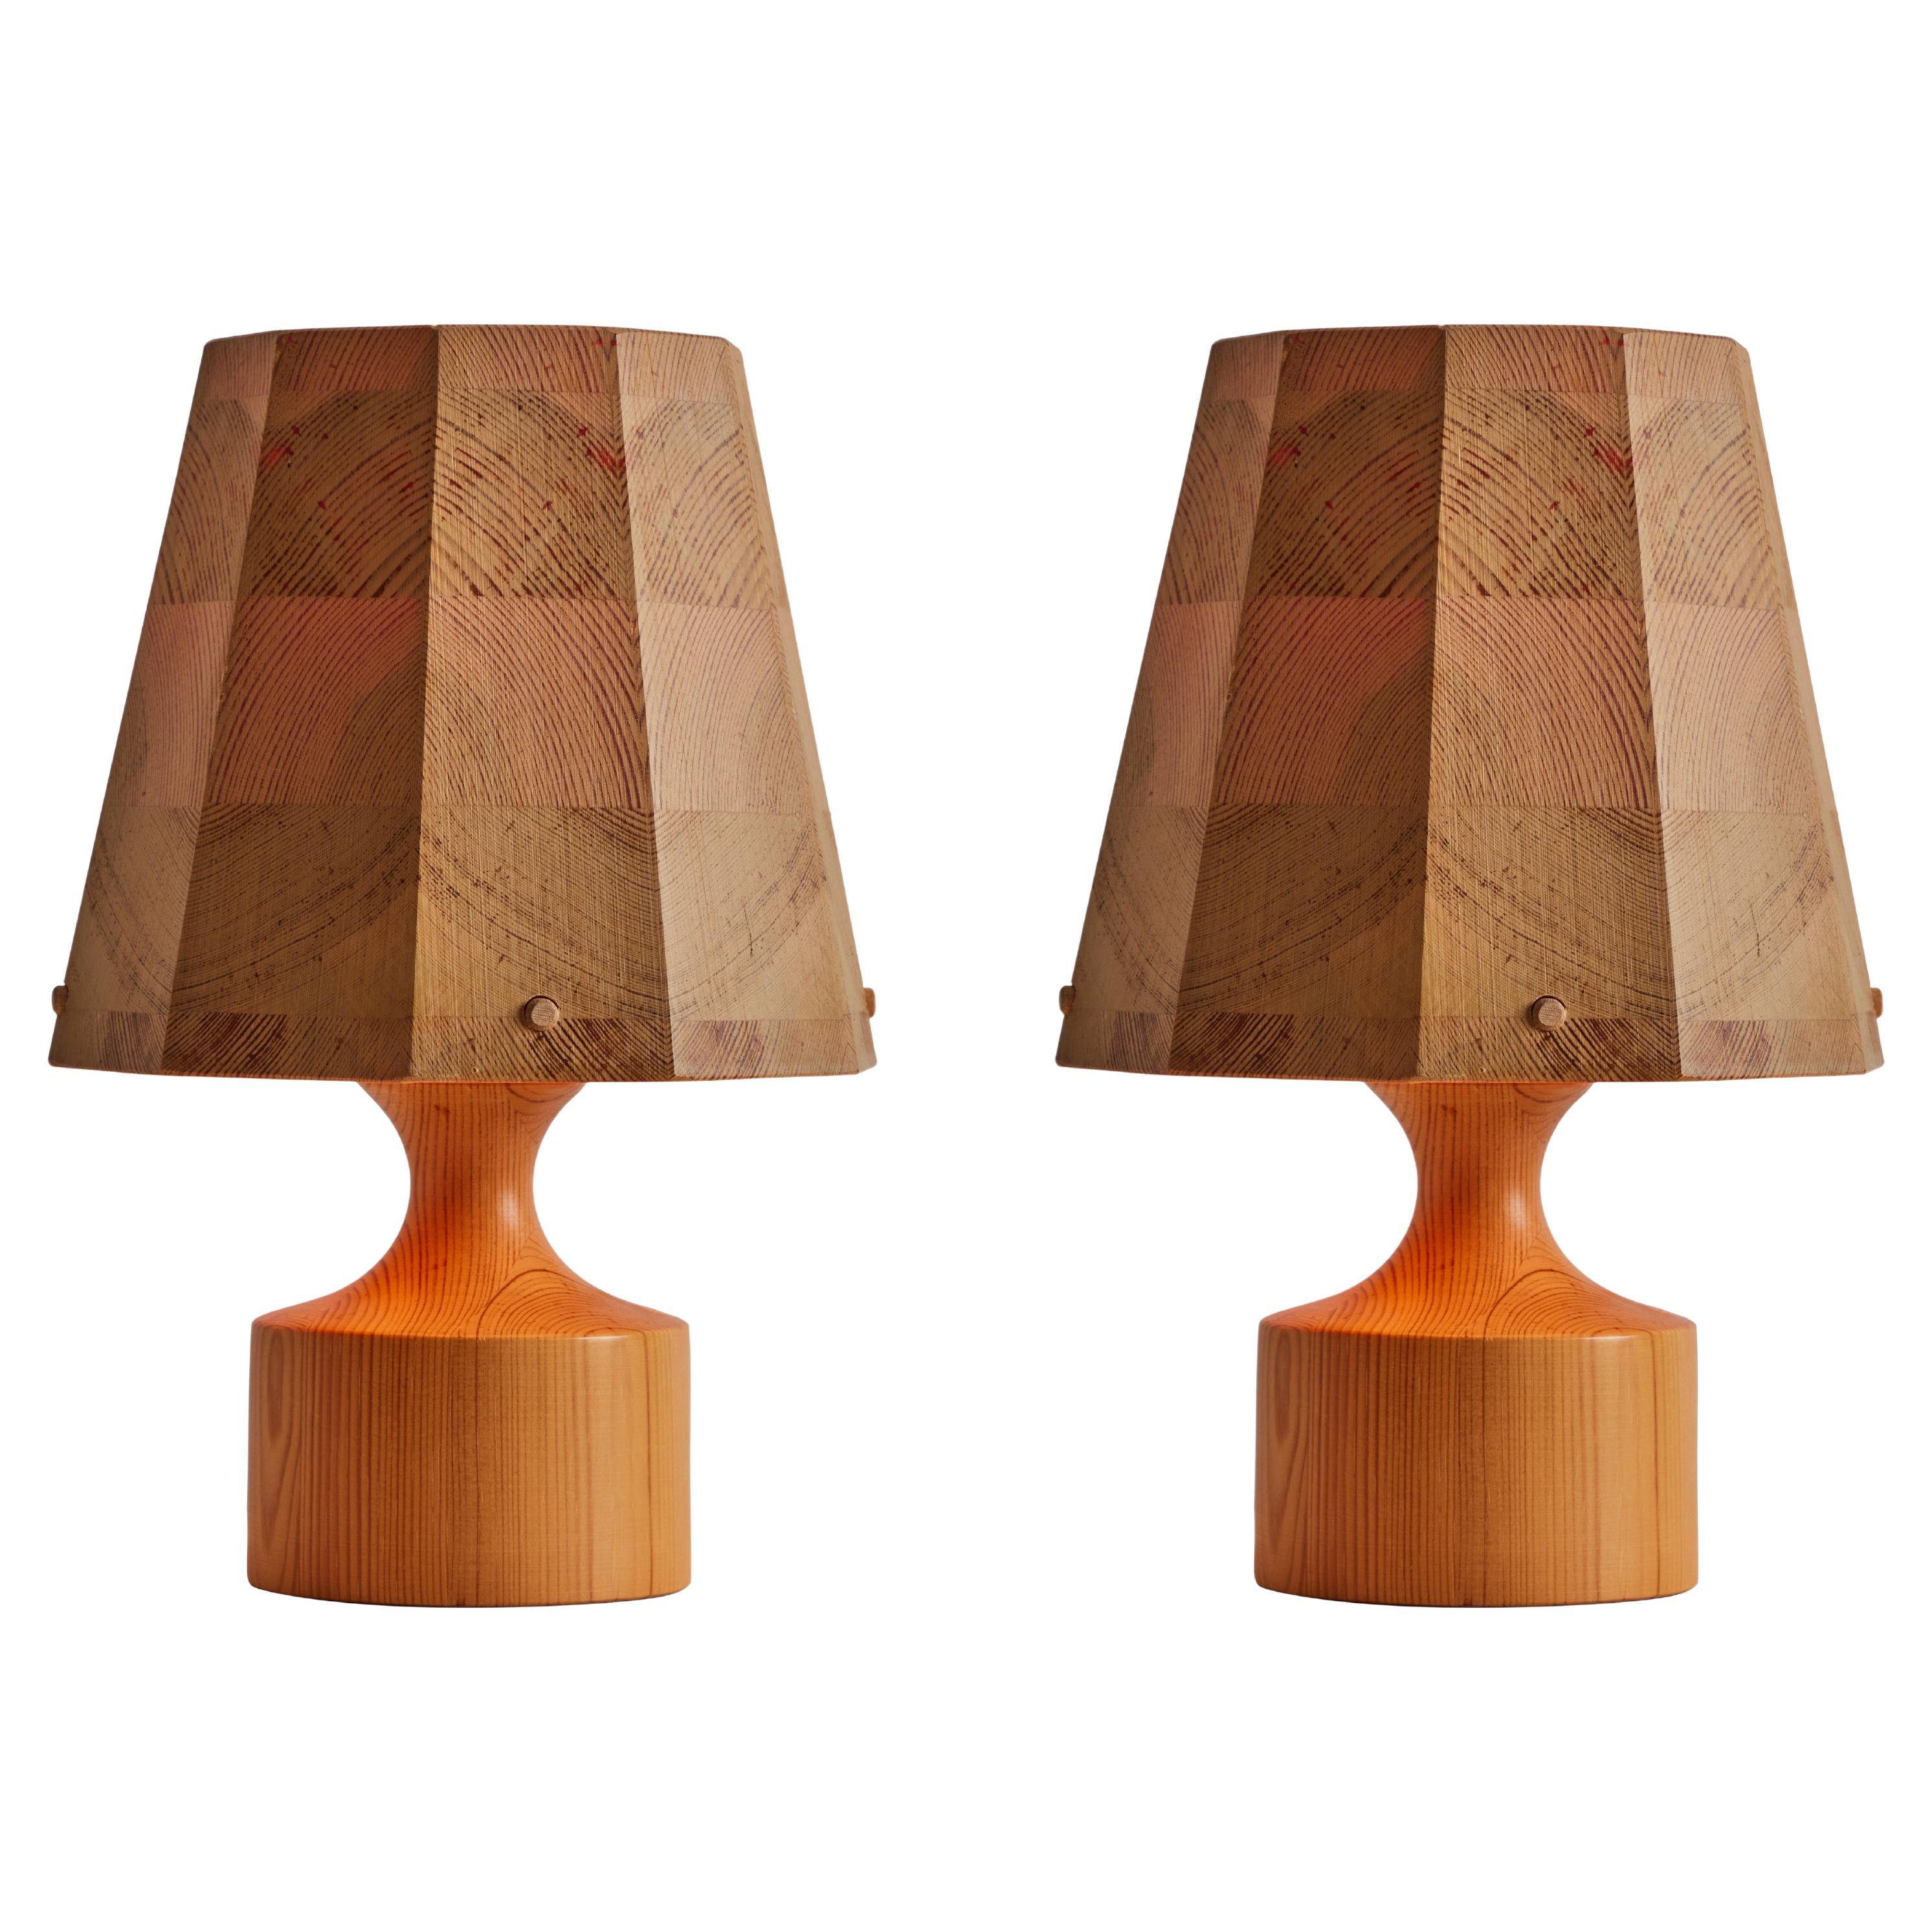 Pair of 1960s Wood Table Lamps Attributed to Hans-Agne Jakobsson for AB Ellysett For Sale